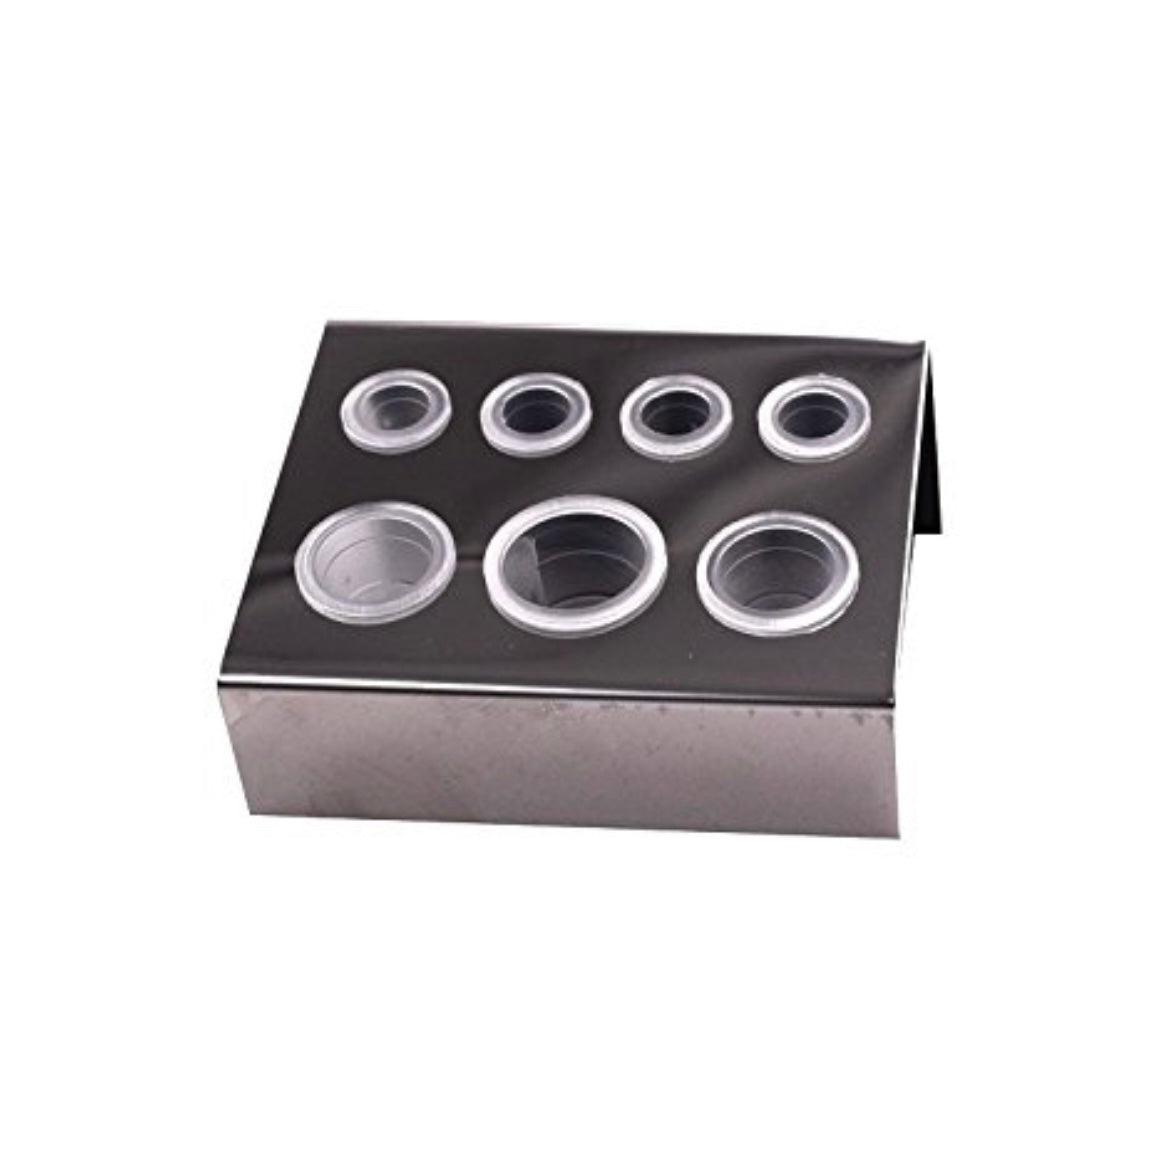 STAINLESS STEEL INK CUP HOLDER